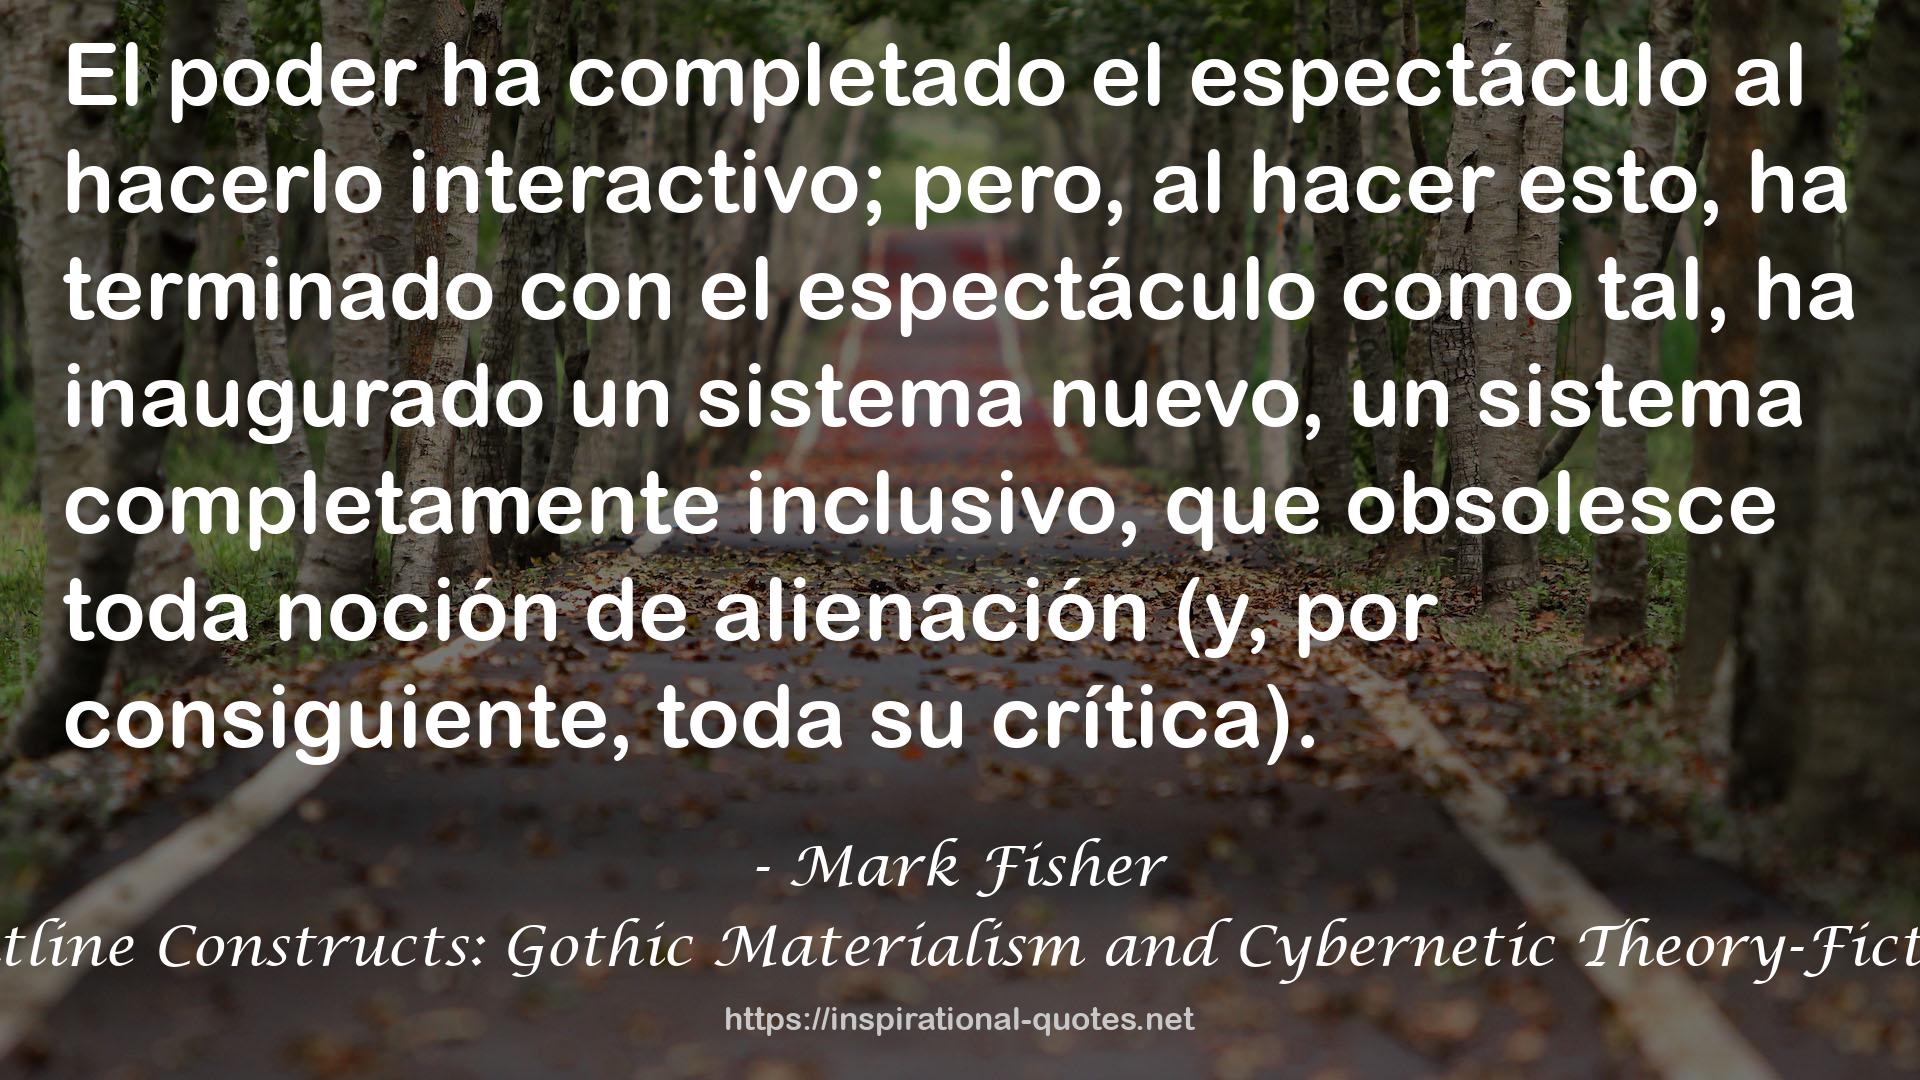 Mark Fisher QUOTES